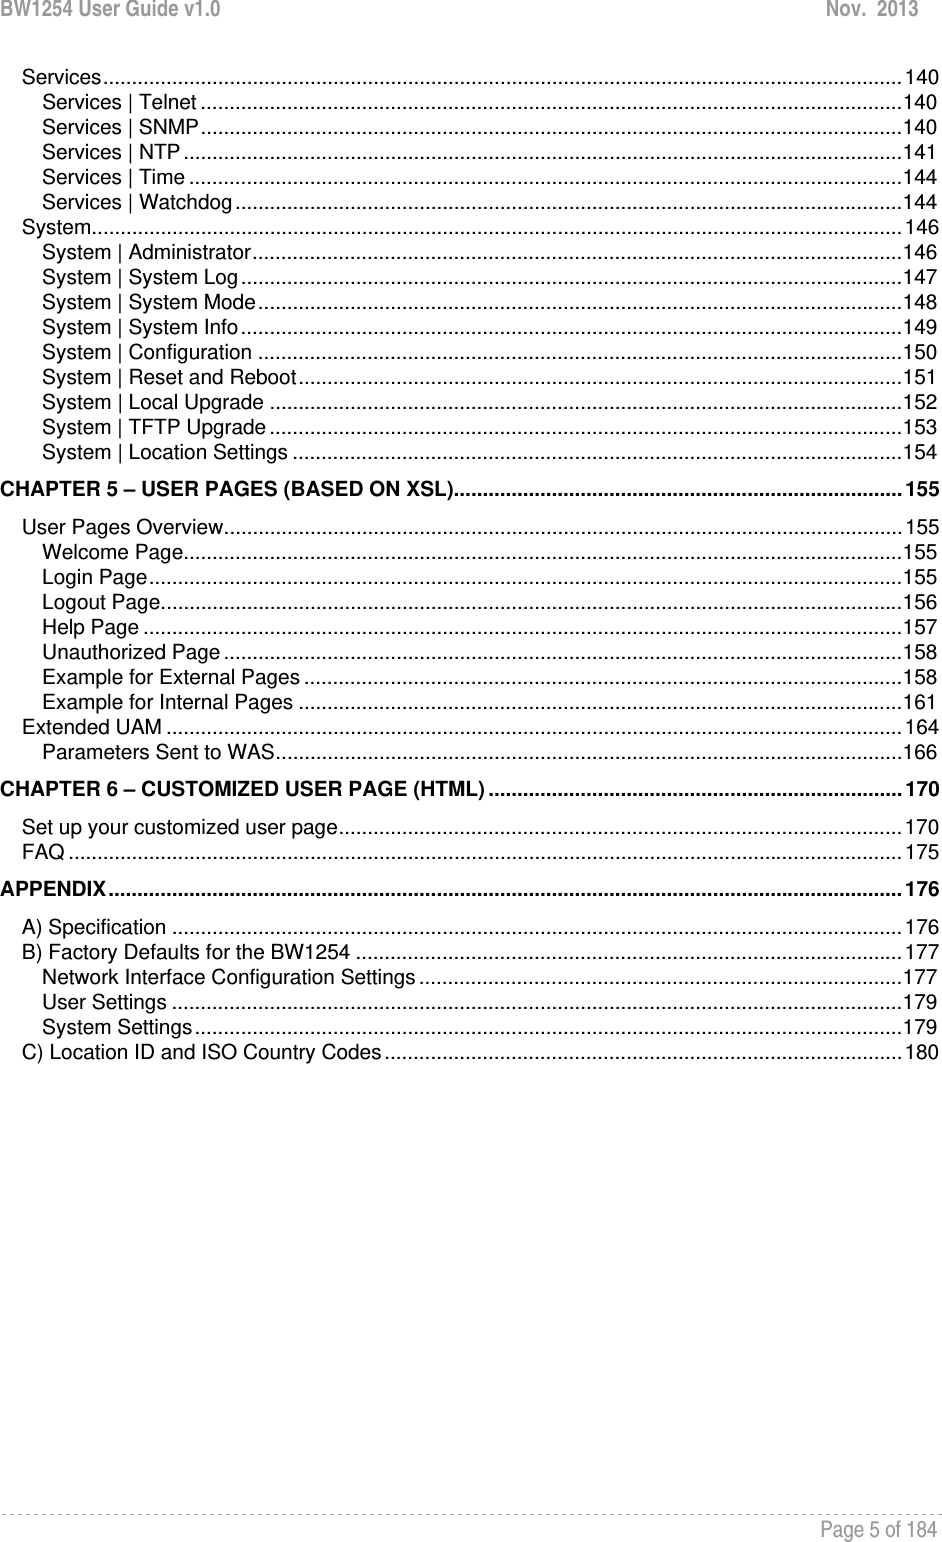 BW1254 User Guide v1.0  Nov.  2013     Page 5 of 184   Services ........................................................................................................................................... 140Services | Telnet .......................................................................................................................... 140Services | SNMP .......................................................................................................................... 140Services | NTP ............................................................................................................................. 141Services | Time ............................................................................................................................ 144Services | Watchdog .................................................................................................................... 144System ............................................................................................................................................. 146System | Administrator ................................................................................................................. 146System | System Log ................................................................................................................... 147System | System Mode ................................................................................................................ 148System | System Info ................................................................................................................... 149System | Configuration ................................................................................................................ 150System | Reset and Reboot ......................................................................................................... 151System | Local Upgrade .............................................................................................................. 152System | TFTP Upgrade .............................................................................................................. 153System | Location Settings .......................................................................................................... 154CHAPTER 5 – USER PAGES (BASED ON XSL).............................................................................. 155User Pages Overview ...................................................................................................................... 155Welcome Page............................................................................................................................. 155Login Page ................................................................................................................................... 155Logout Page ................................................................................................................................. 156Help Page .................................................................................................................................... 157Unauthorized Page ...................................................................................................................... 158Example for External Pages ........................................................................................................ 158Example for Internal Pages ......................................................................................................... 161Extended UAM ................................................................................................................................ 164Parameters Sent to WAS ............................................................................................................. 166CHAPTER 6 – CUSTOMIZED USER PAGE (HTML) ........................................................................ 170Set up your customized user page .................................................................................................. 170FAQ ................................................................................................................................................. 175APPENDIX .......................................................................................................................................... 176A) Specification ............................................................................................................................... 176B) Factory Defaults for the BW1254 ............................................................................................... 177Network Interface Configuration Settings .................................................................................... 177User Settings ............................................................................................................................... 179System Settings ........................................................................................................................... 179C) Location ID and ISO Country Codes .......................................................................................... 180 